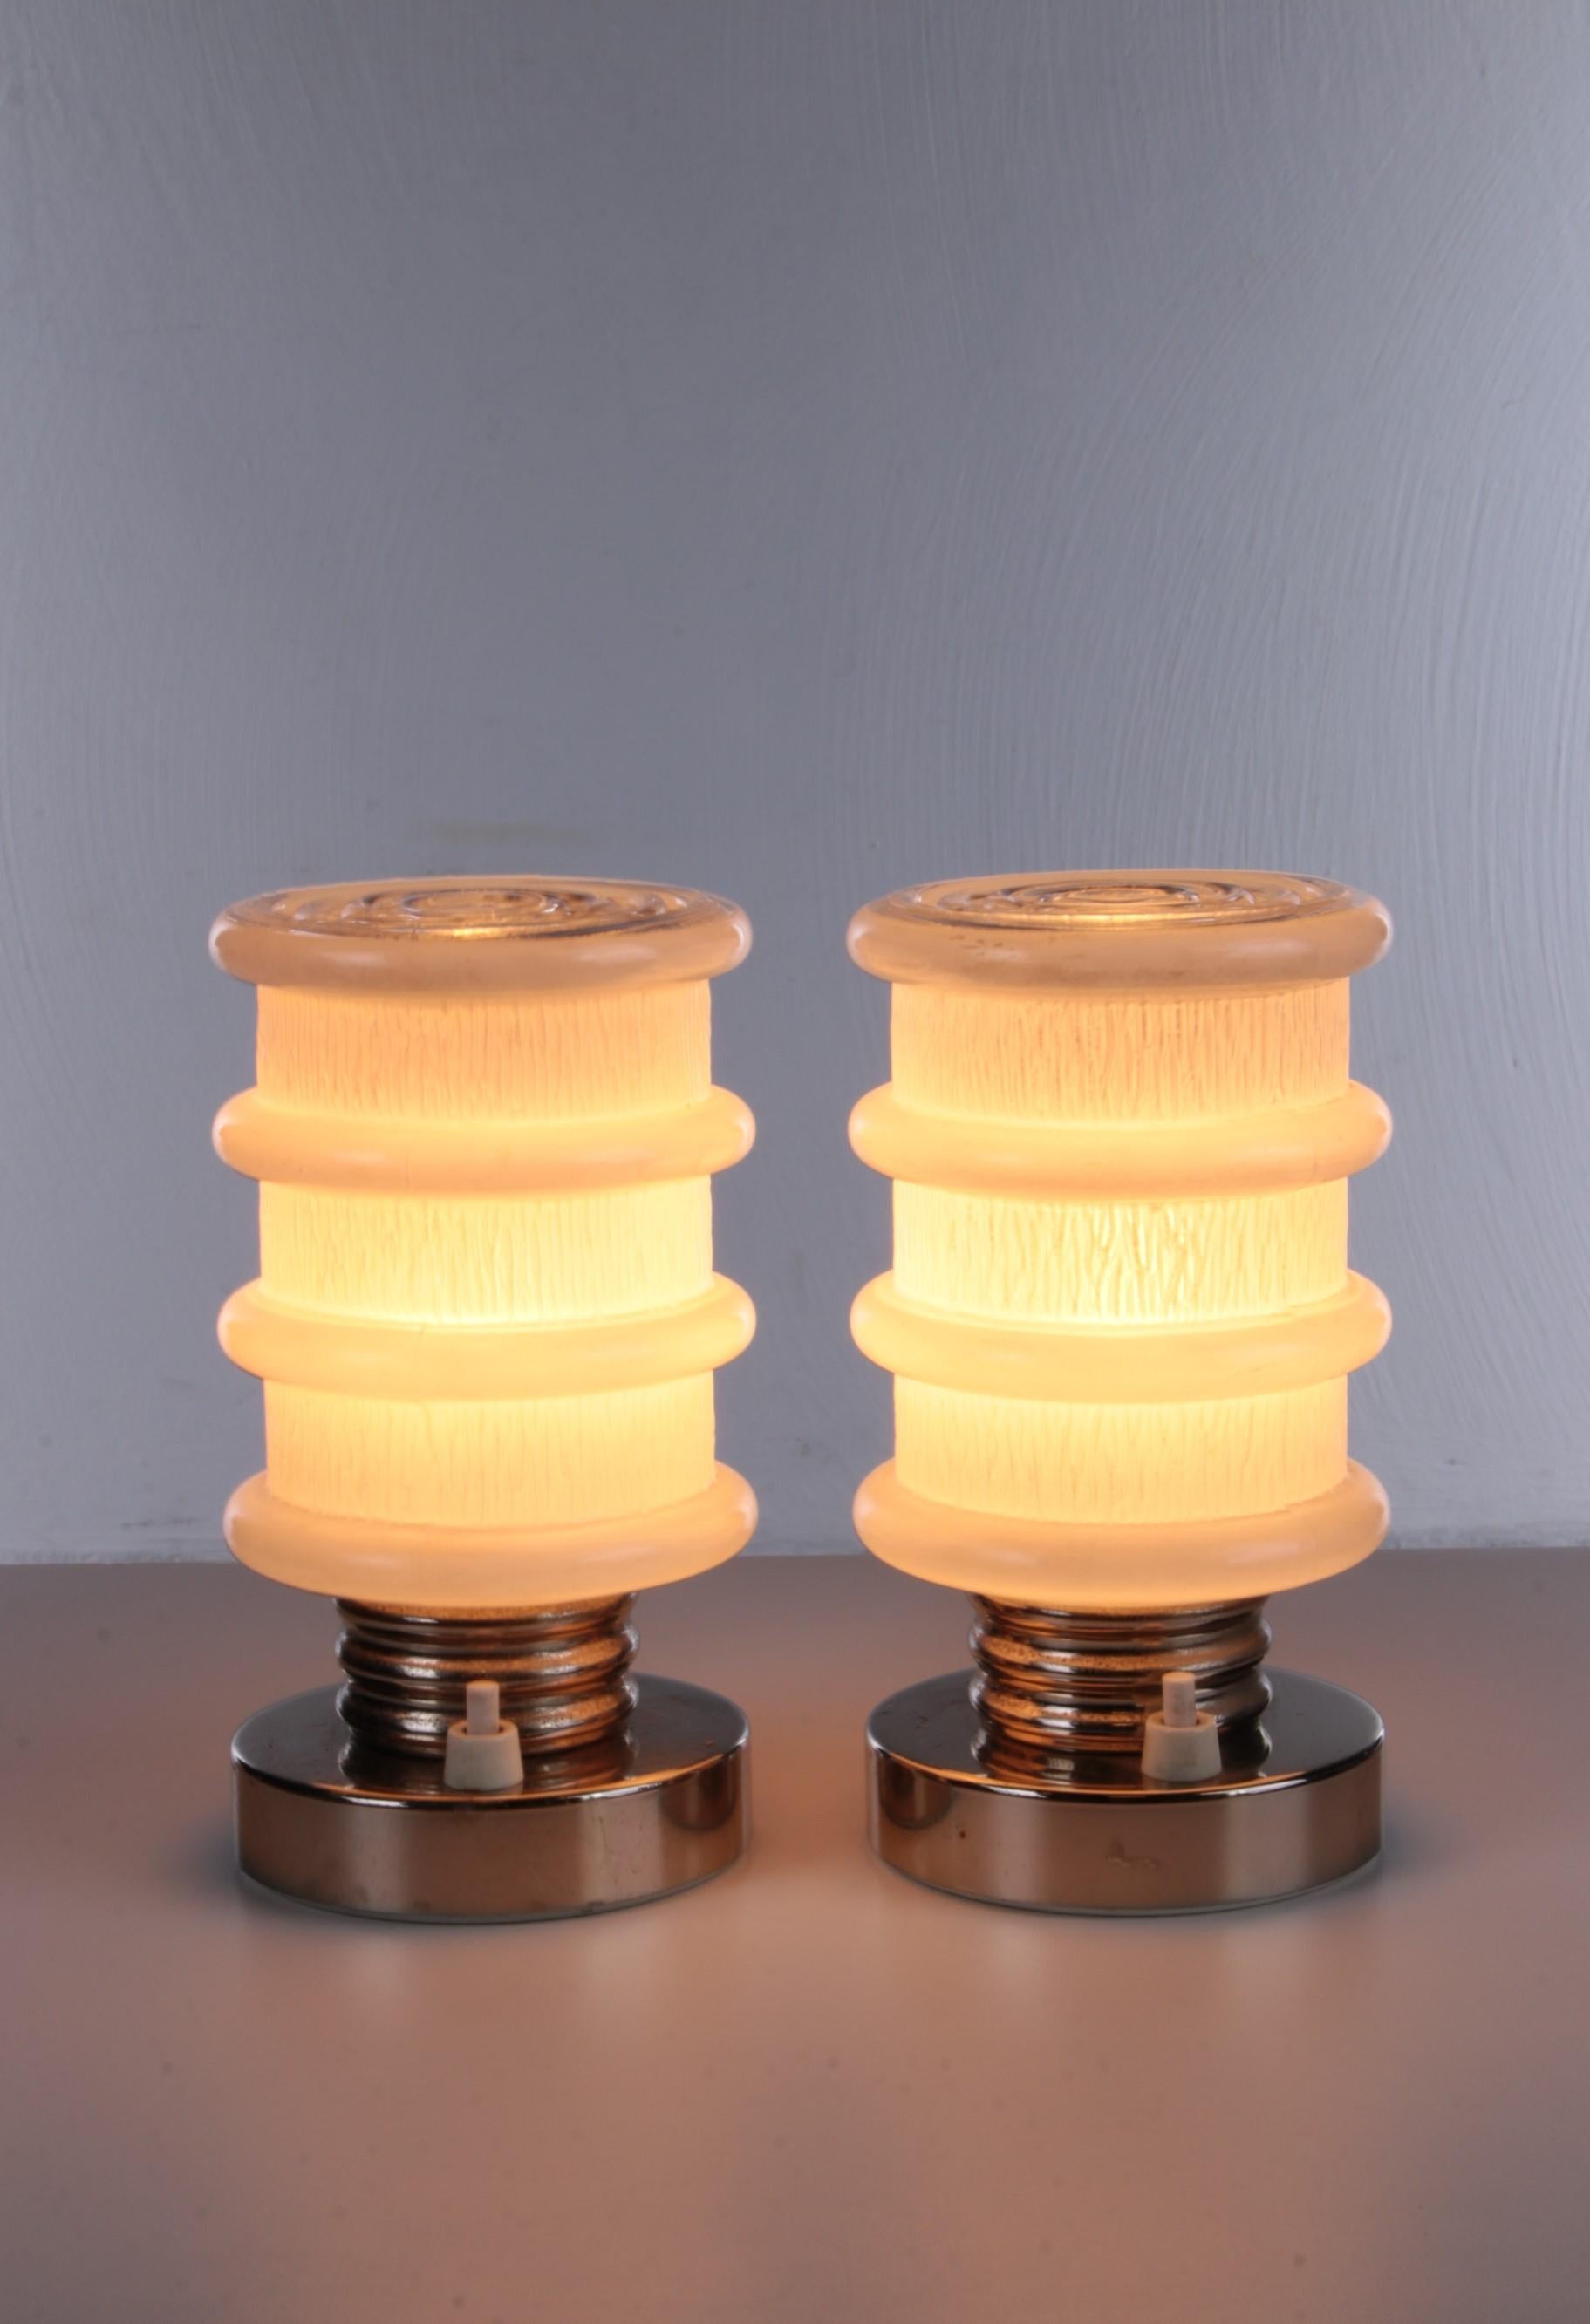 A vintage german table lamp set made with chrome and white glass, from the 1970s

Beautiful set of two table lamps made of a chrome color base with a small E14 fitting.

The glass is beautiful white milk glass with a wavy design. This gives both